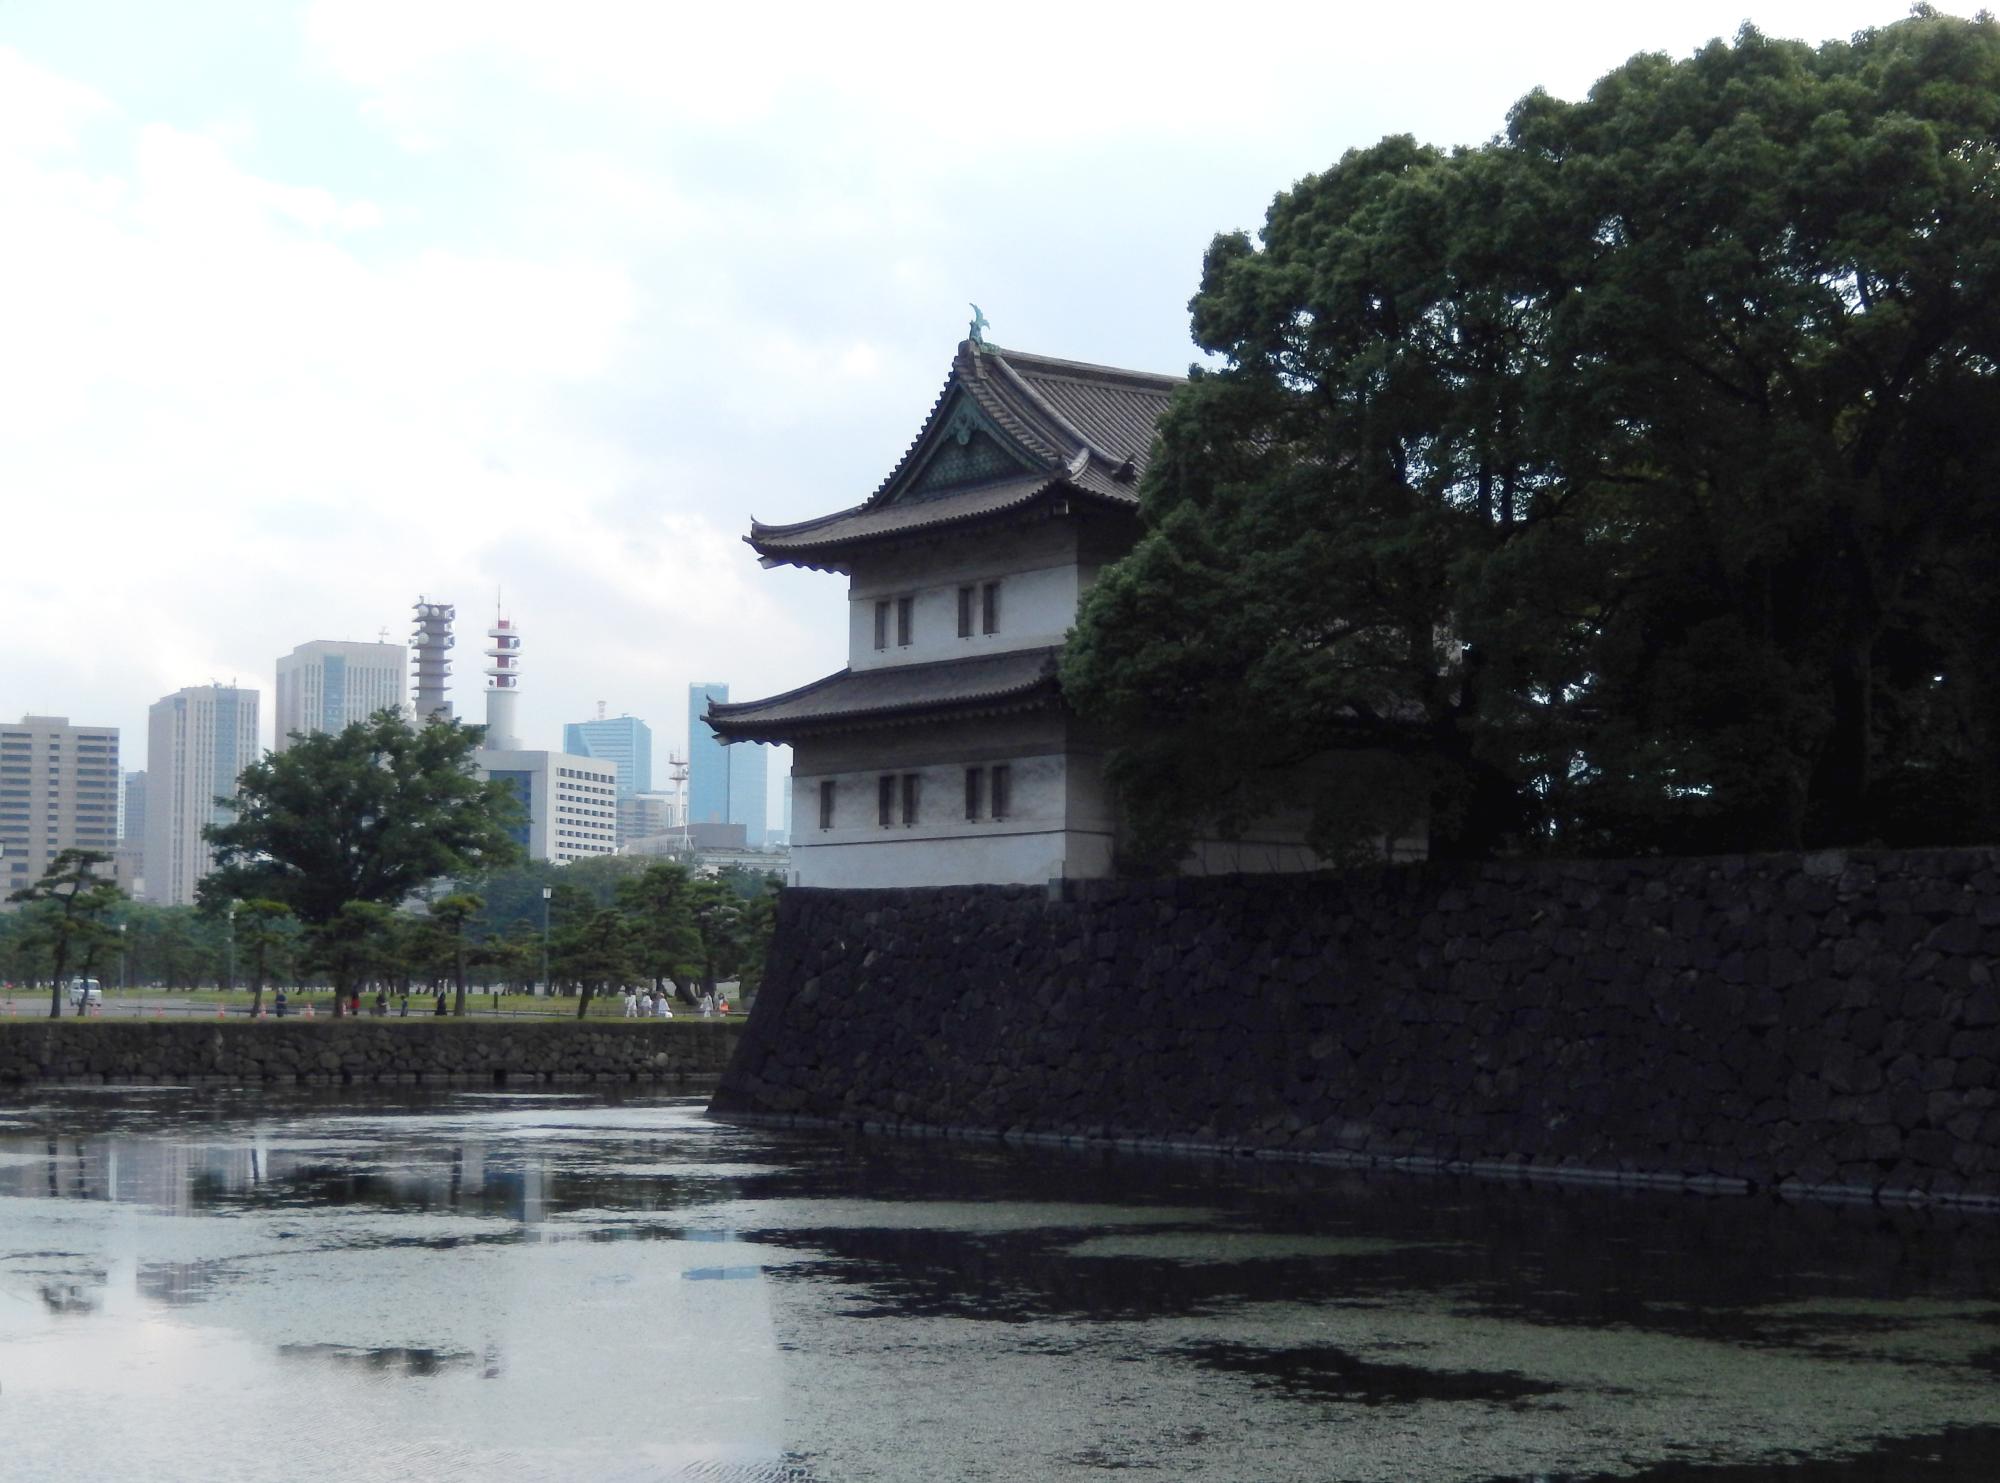 Tokyo (2017) - Imperial Palace #09